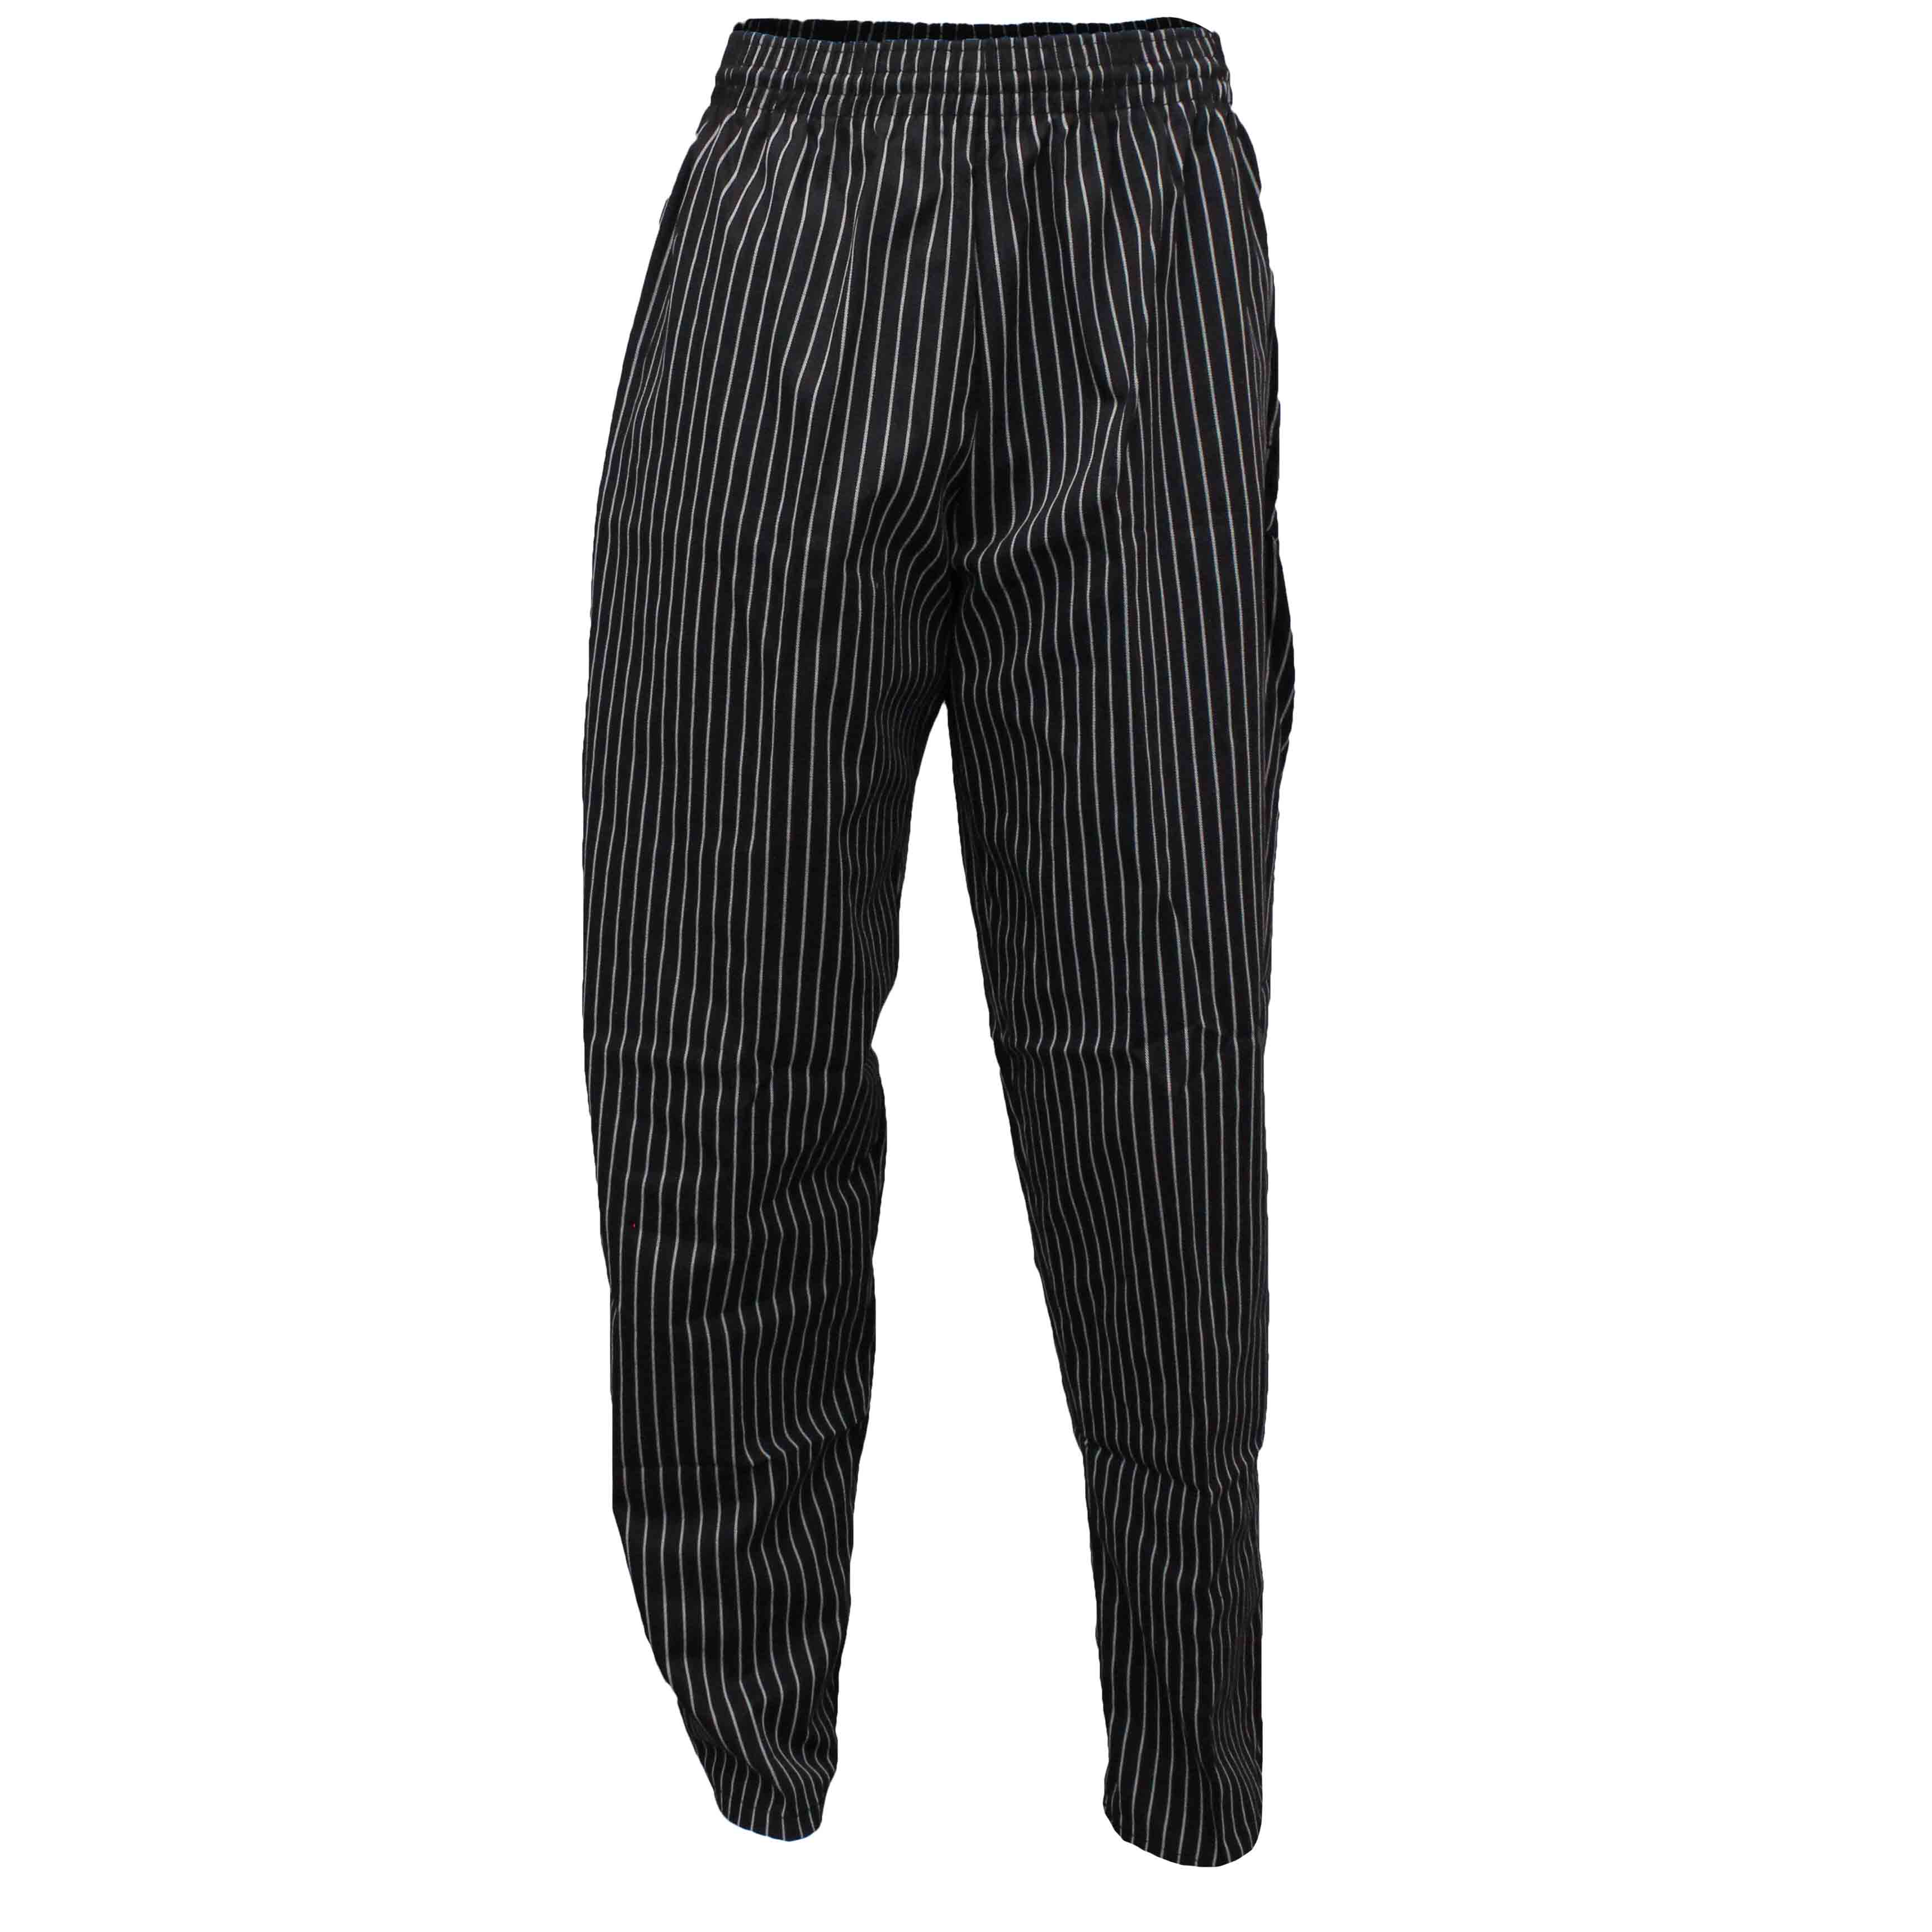 Men's Checked Baggy Chef Pant